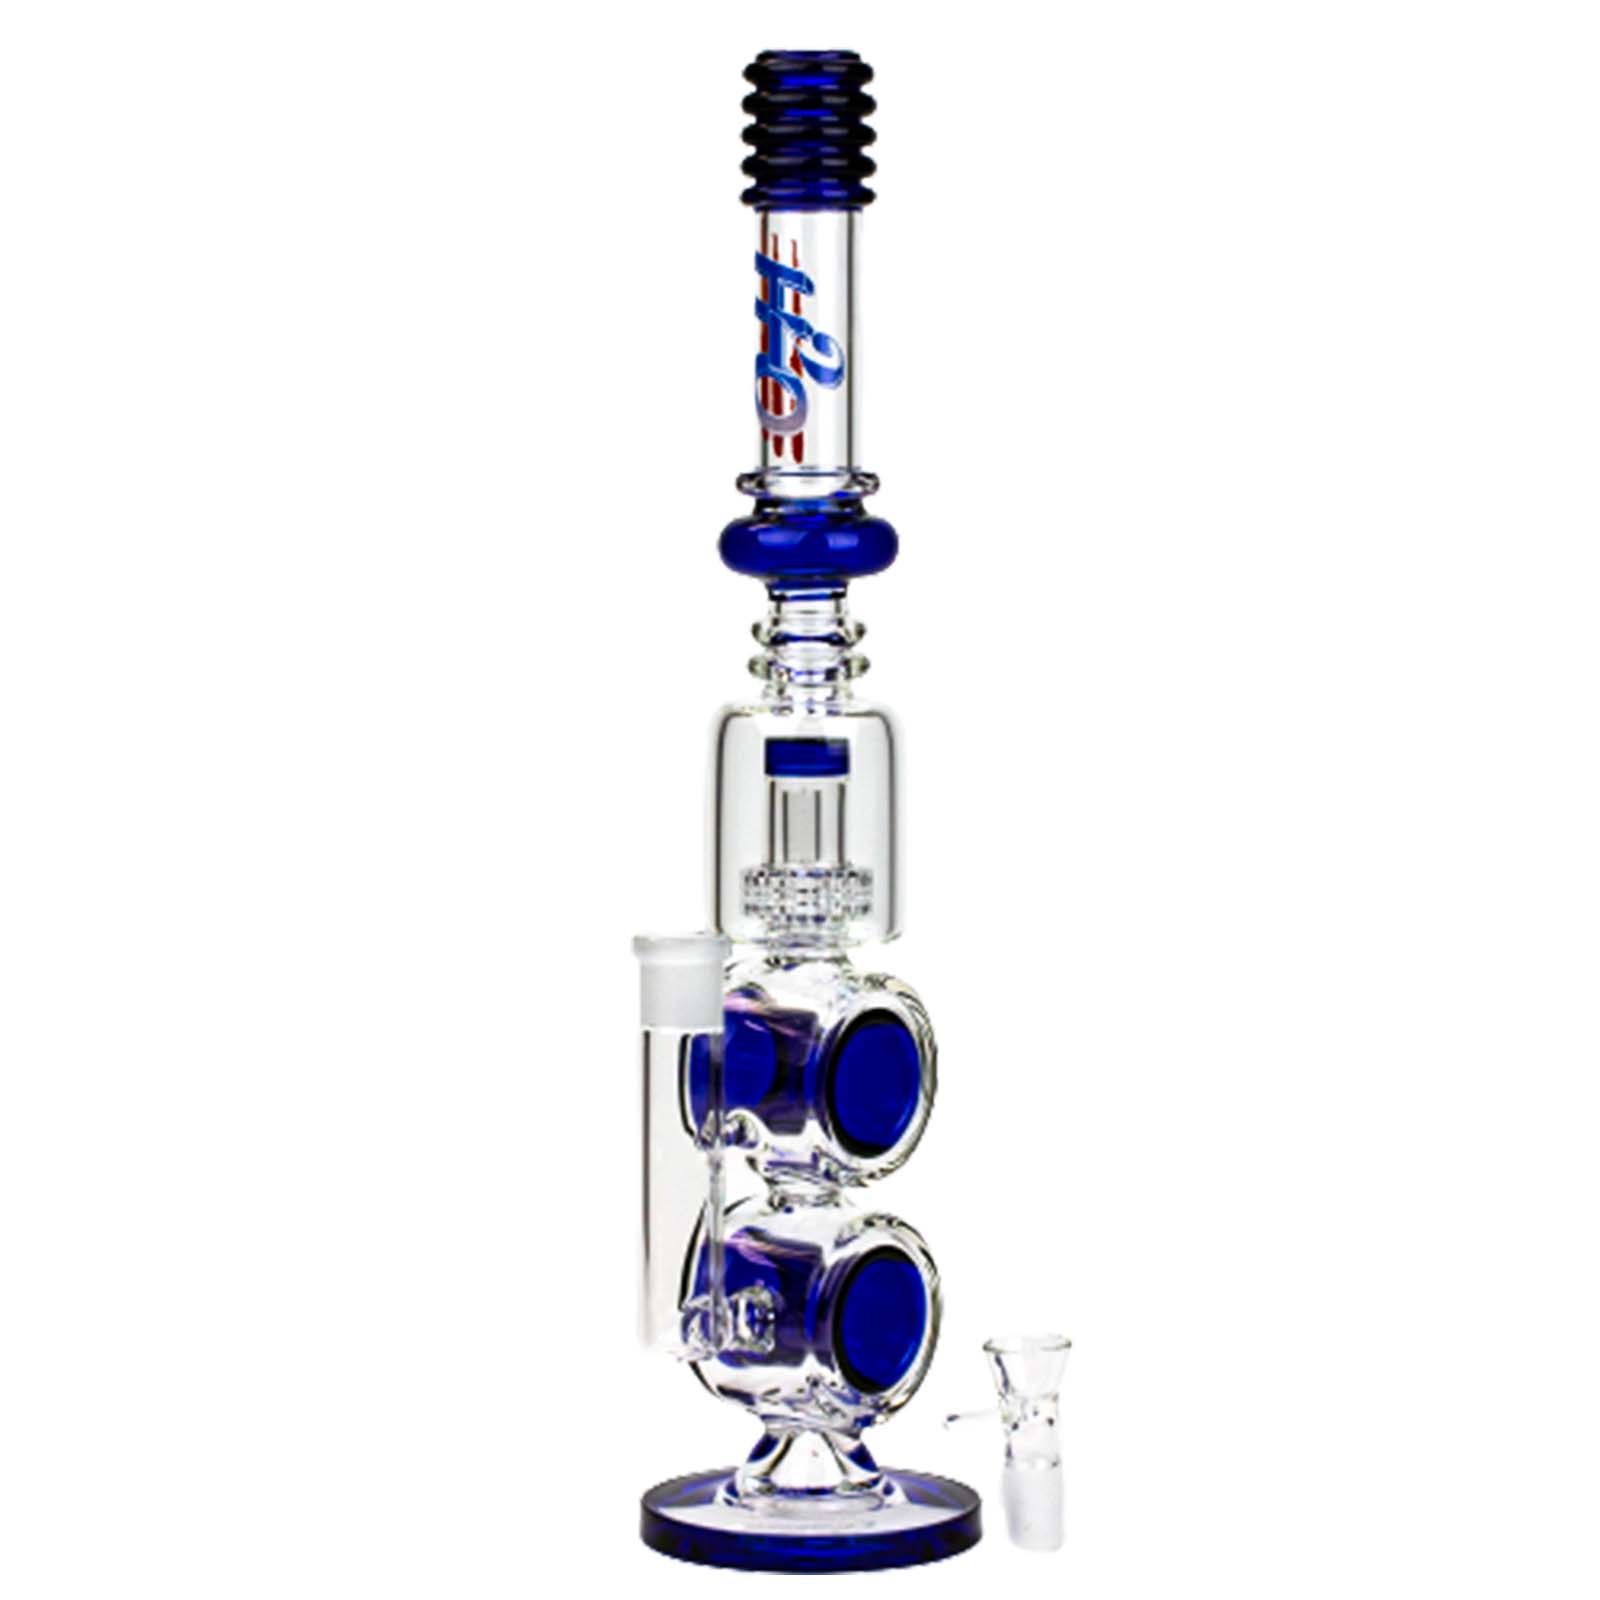 17" H2O Double Ring Glass Bong